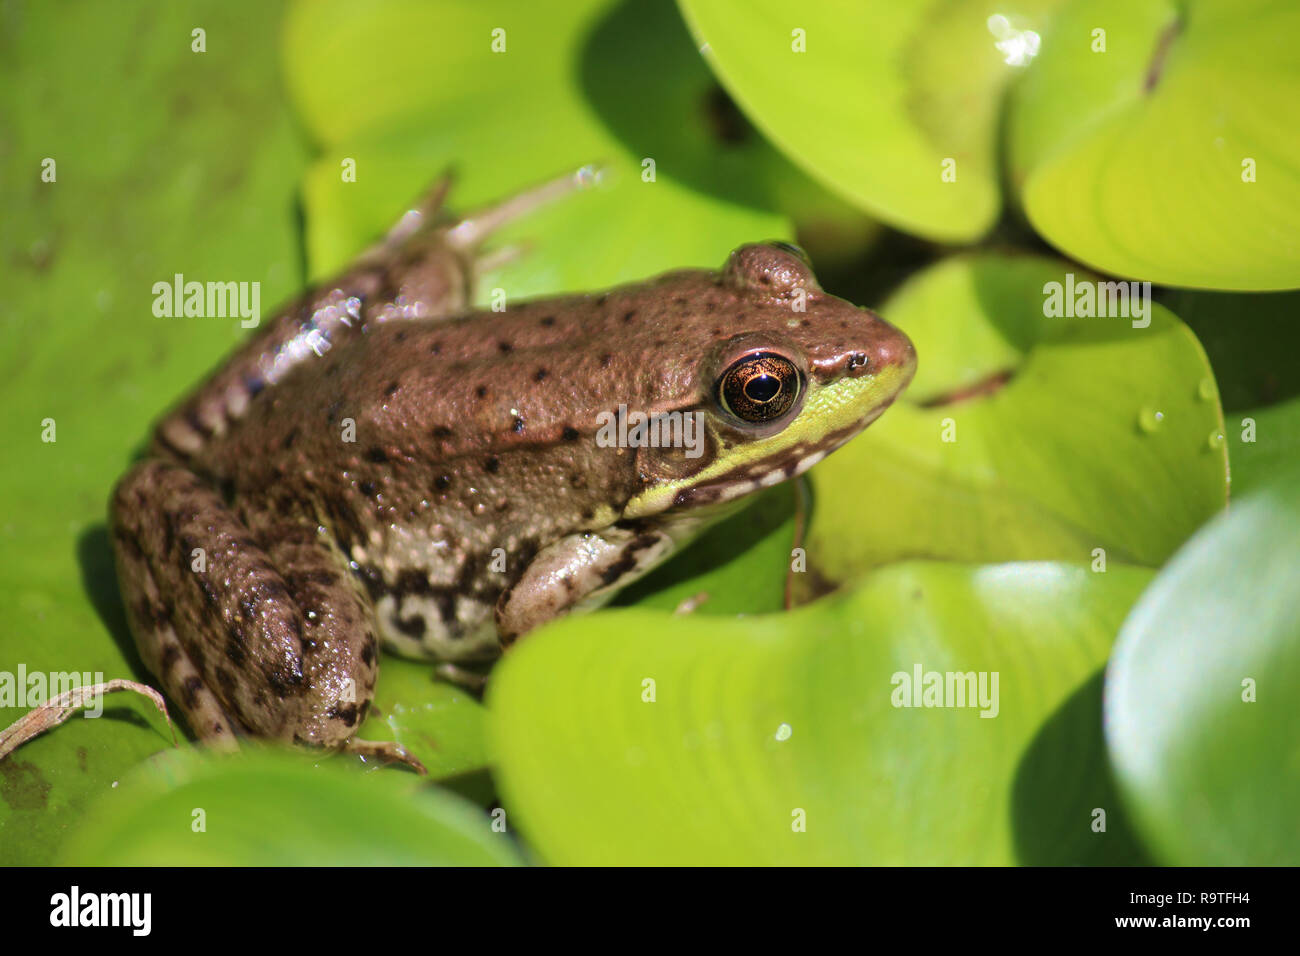 Close up of an American Bullfrog, Lithobates catesbeianus, sitting on a lily pad Stock Photo